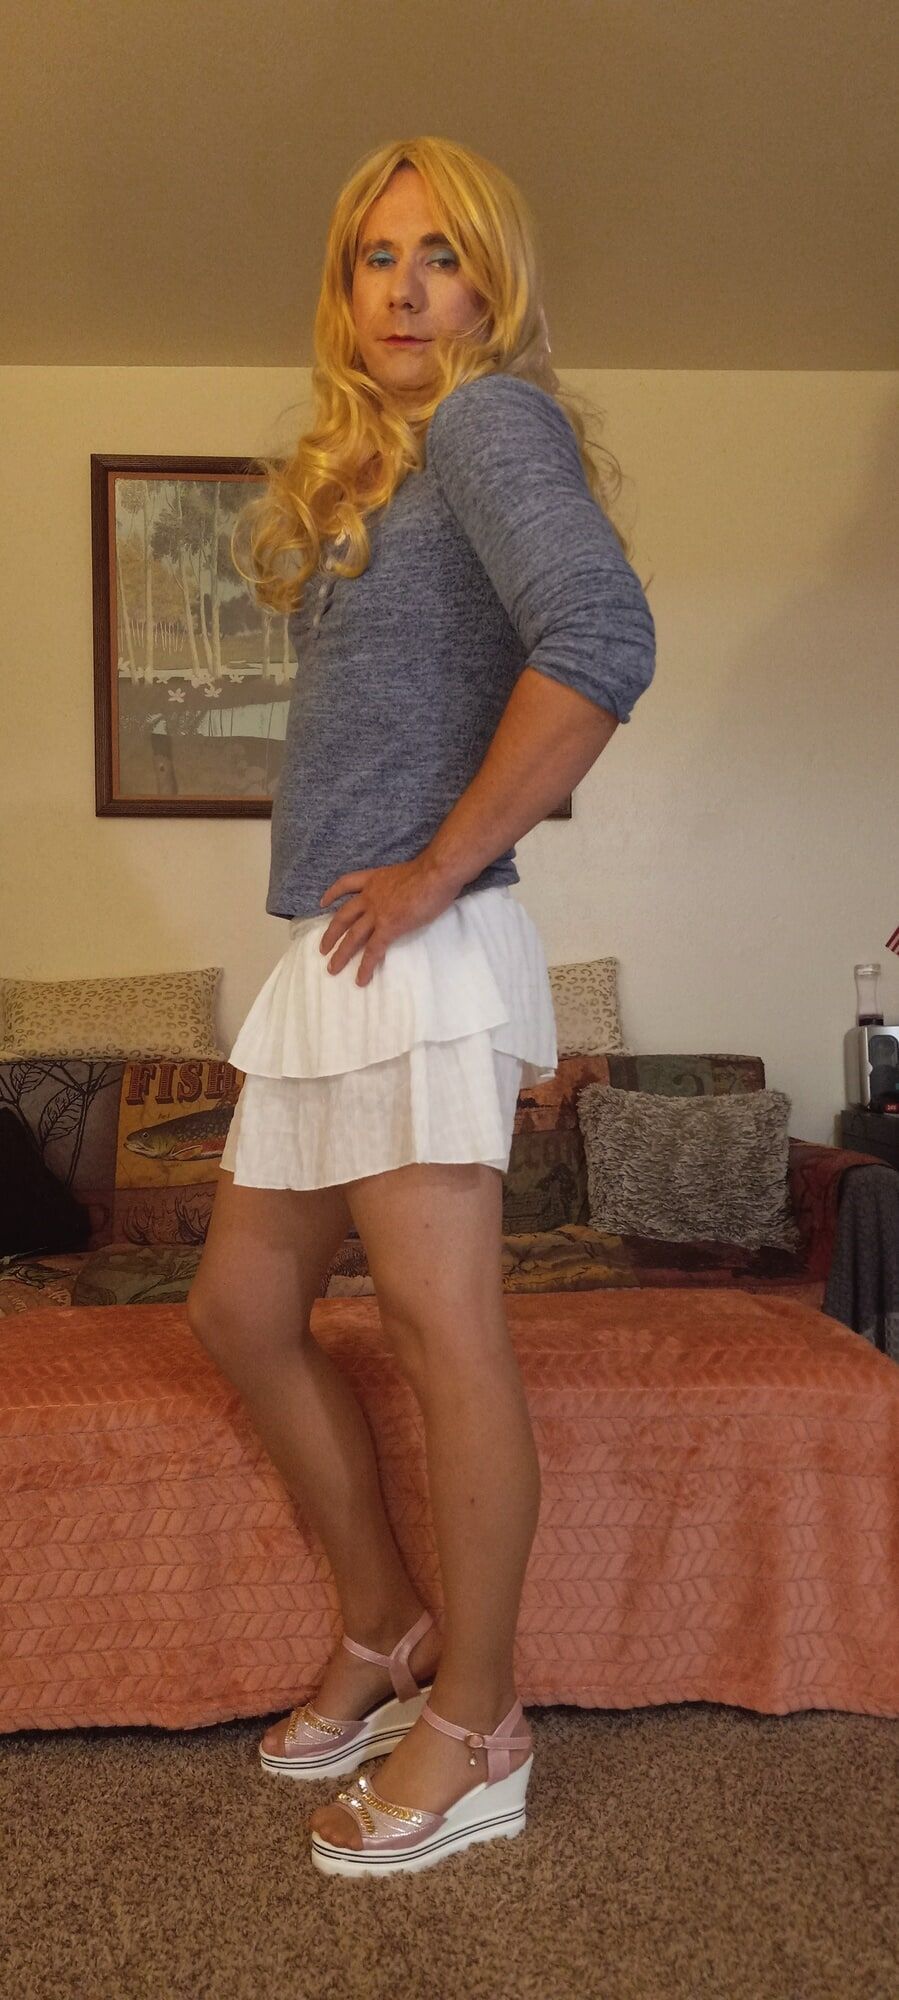 Sissy crossdresser Erica first showing of her girly face #10